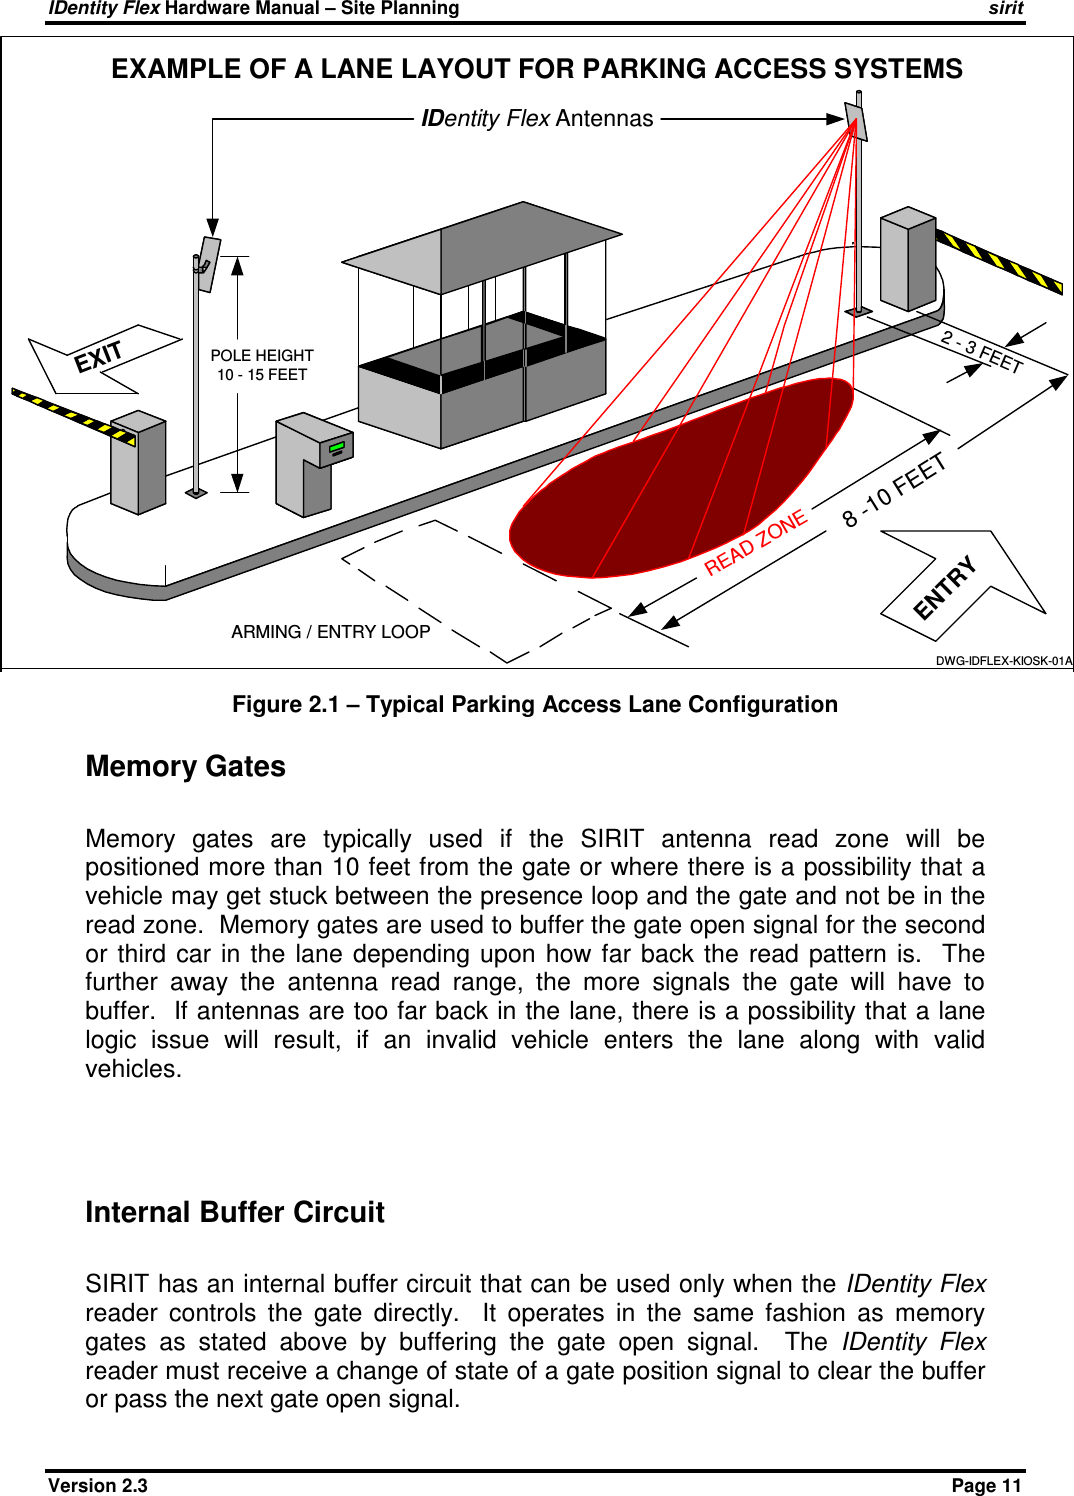 IDentity Flex Hardware Manual – Site Planning    sirit Version 2.3    Page 11 Figure 2.1 – Typical Parking Access Lane Configuration  Memory Gates  Memory  gates  are  typically  used  if  the  SIRIT  antenna  read  zone  will  be positioned more than 10 feet from the gate or where there is a possibility that a vehicle may get stuck between the presence loop and the gate and not be in the read zone.  Memory gates are used to buffer the gate open signal for the second or  third  car in  the  lane  depending  upon  how  far  back  the  read  pattern  is.   The further  away  the  antenna  read  range,  the  more  signals  the  gate  will  have  to buffer.  If antennas are too far back in the lane, there is a possibility that a lane logic  issue  will  result,  if  an  invalid  vehicle  enters  the  lane  along  with  valid vehicles.     Internal Buffer Circuit  SIRIT has an internal buffer circuit that can be used only when the IDentity Flex reader  controls  the  gate  directly.    It  operates  in  the  same  fashion  as  memory gates  as  stated  above  by  buffering  the  gate  open  signal.    The  IDentity  Flex reader must receive a change of state of a gate position signal to clear the buffer or pass the next gate open signal. IDentity Flex AntennasEXITPOLE HEIGHT10 - 15 FEET2 - 3 FEETARMING / ENTRY LOOP8 -10 FEETREAD ZONEENTRYEXAMPLE OF A LANE LAYOUT FOR PARKING ACCESS SYSTEMSDWG-IDFLEX-KIOSK-01A 